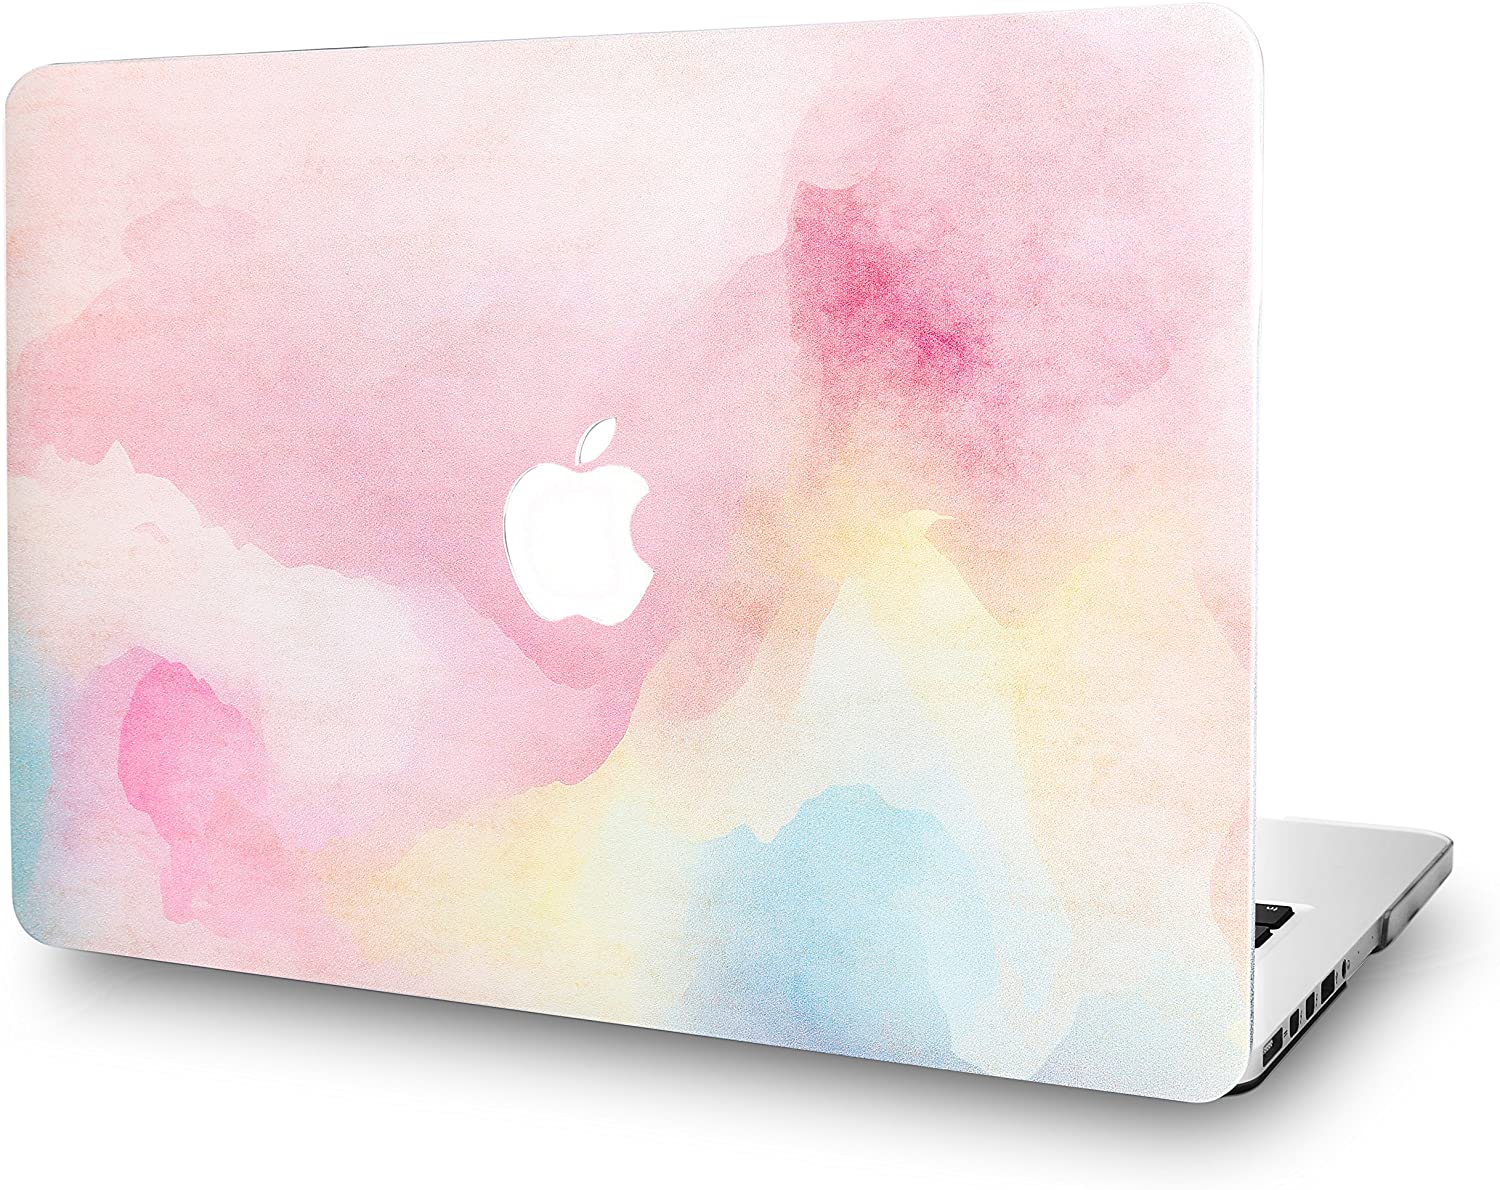 RAINBOW MIST -  MacBook Air 13 inch Case 2018 - 2020 Release. Plastic Pattern Hard Shell  Only Compatible with MacBook Air 13. - e4cents